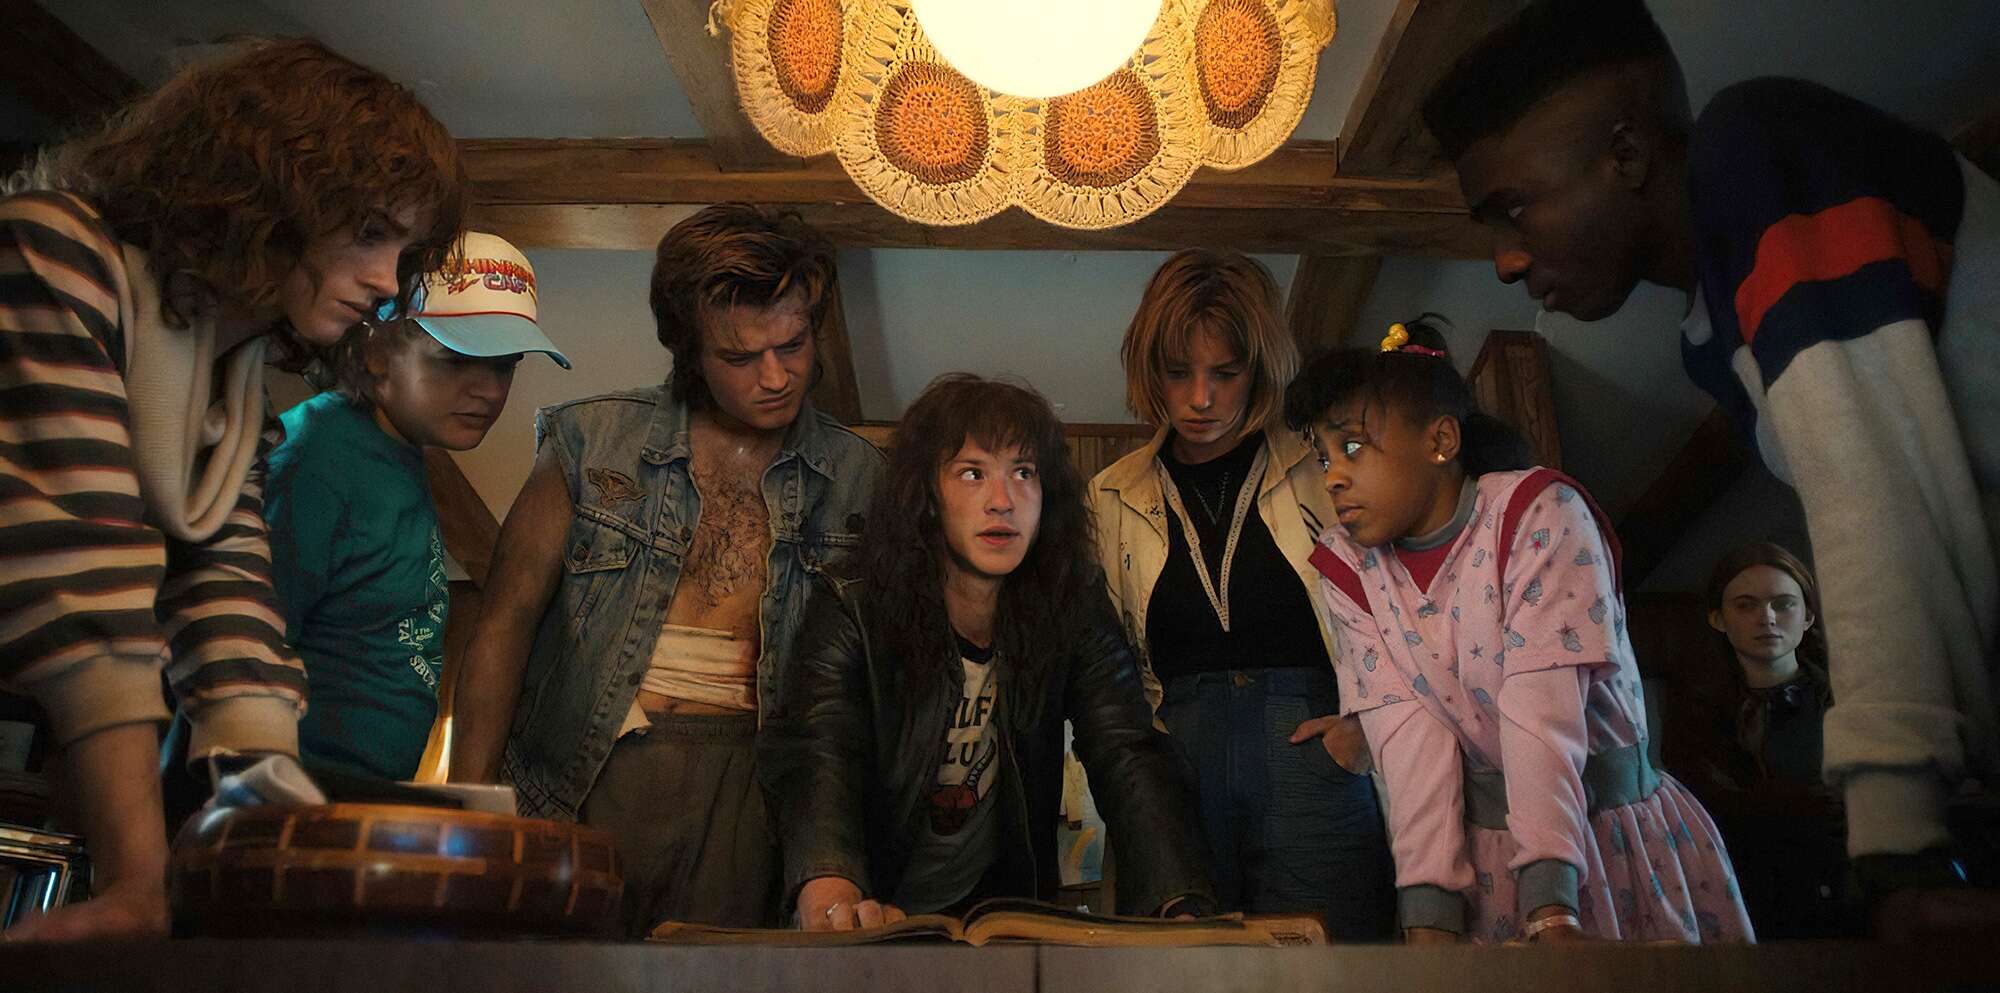 Netflix Crashed When Stranger Things 4 Volume 2 Released, Users Say